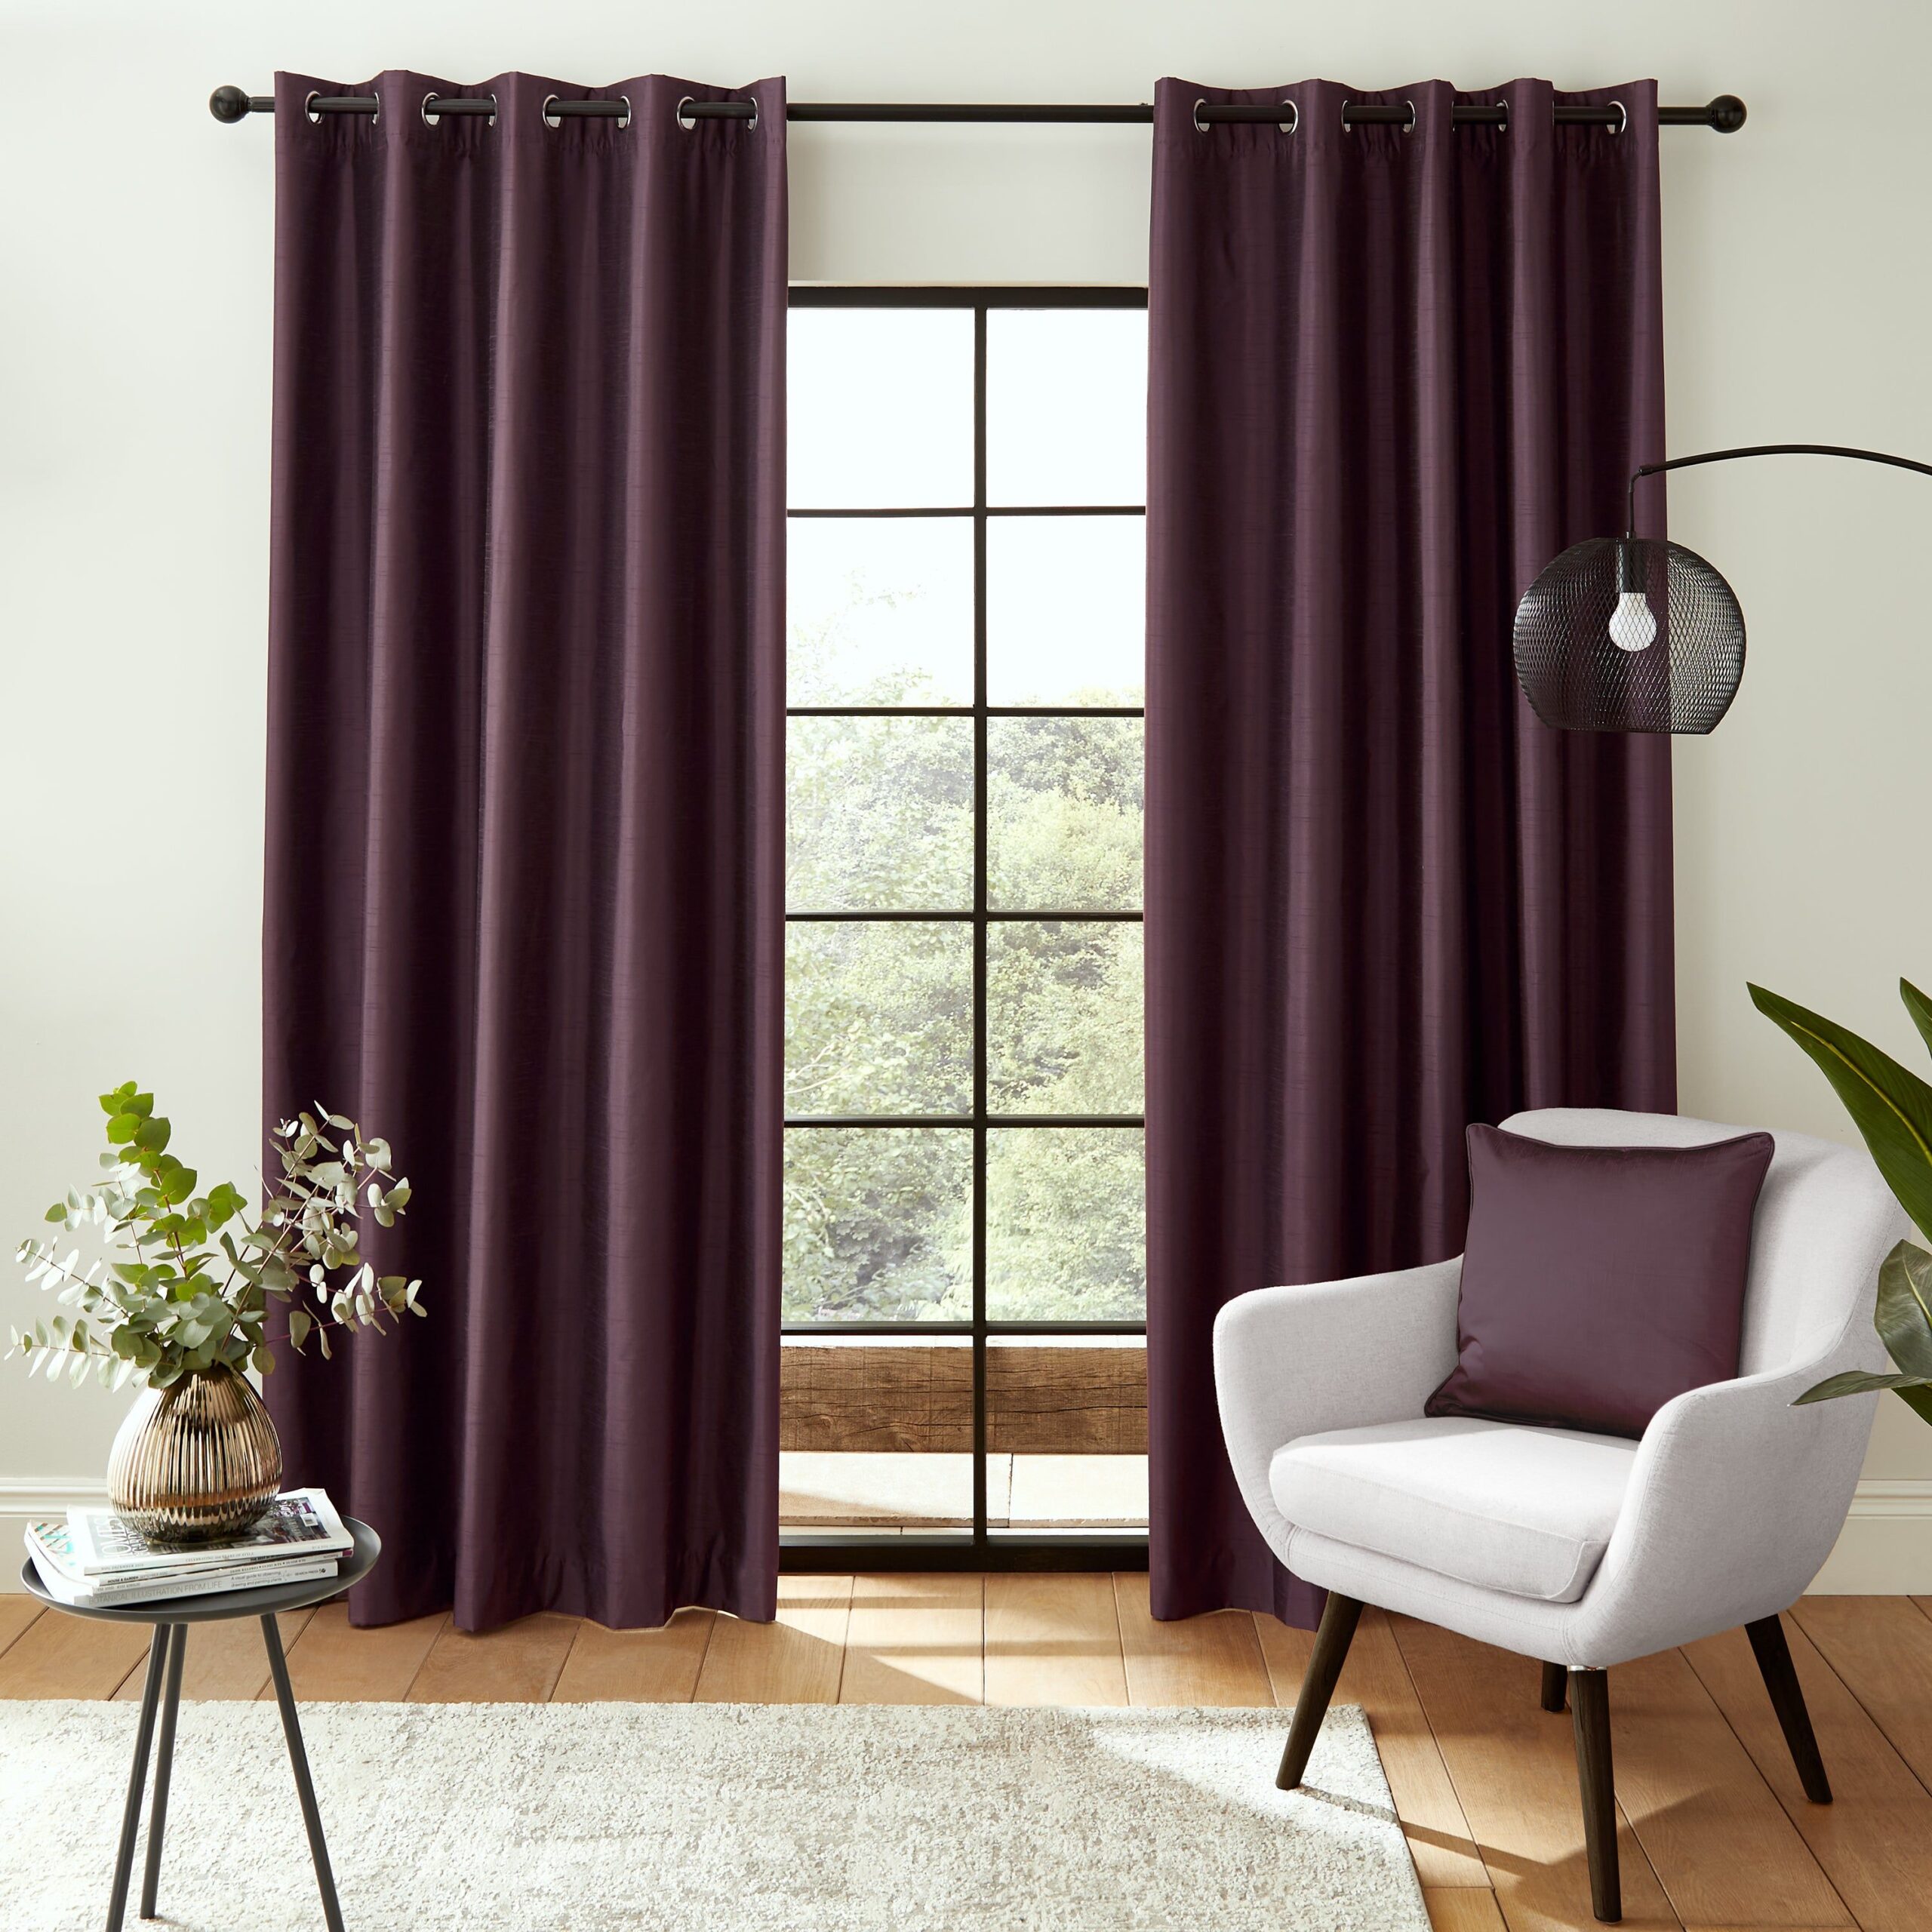 High-Quality Contemporary Faux Silk Eyelet Curtains: A Stylish Addition to Any Room